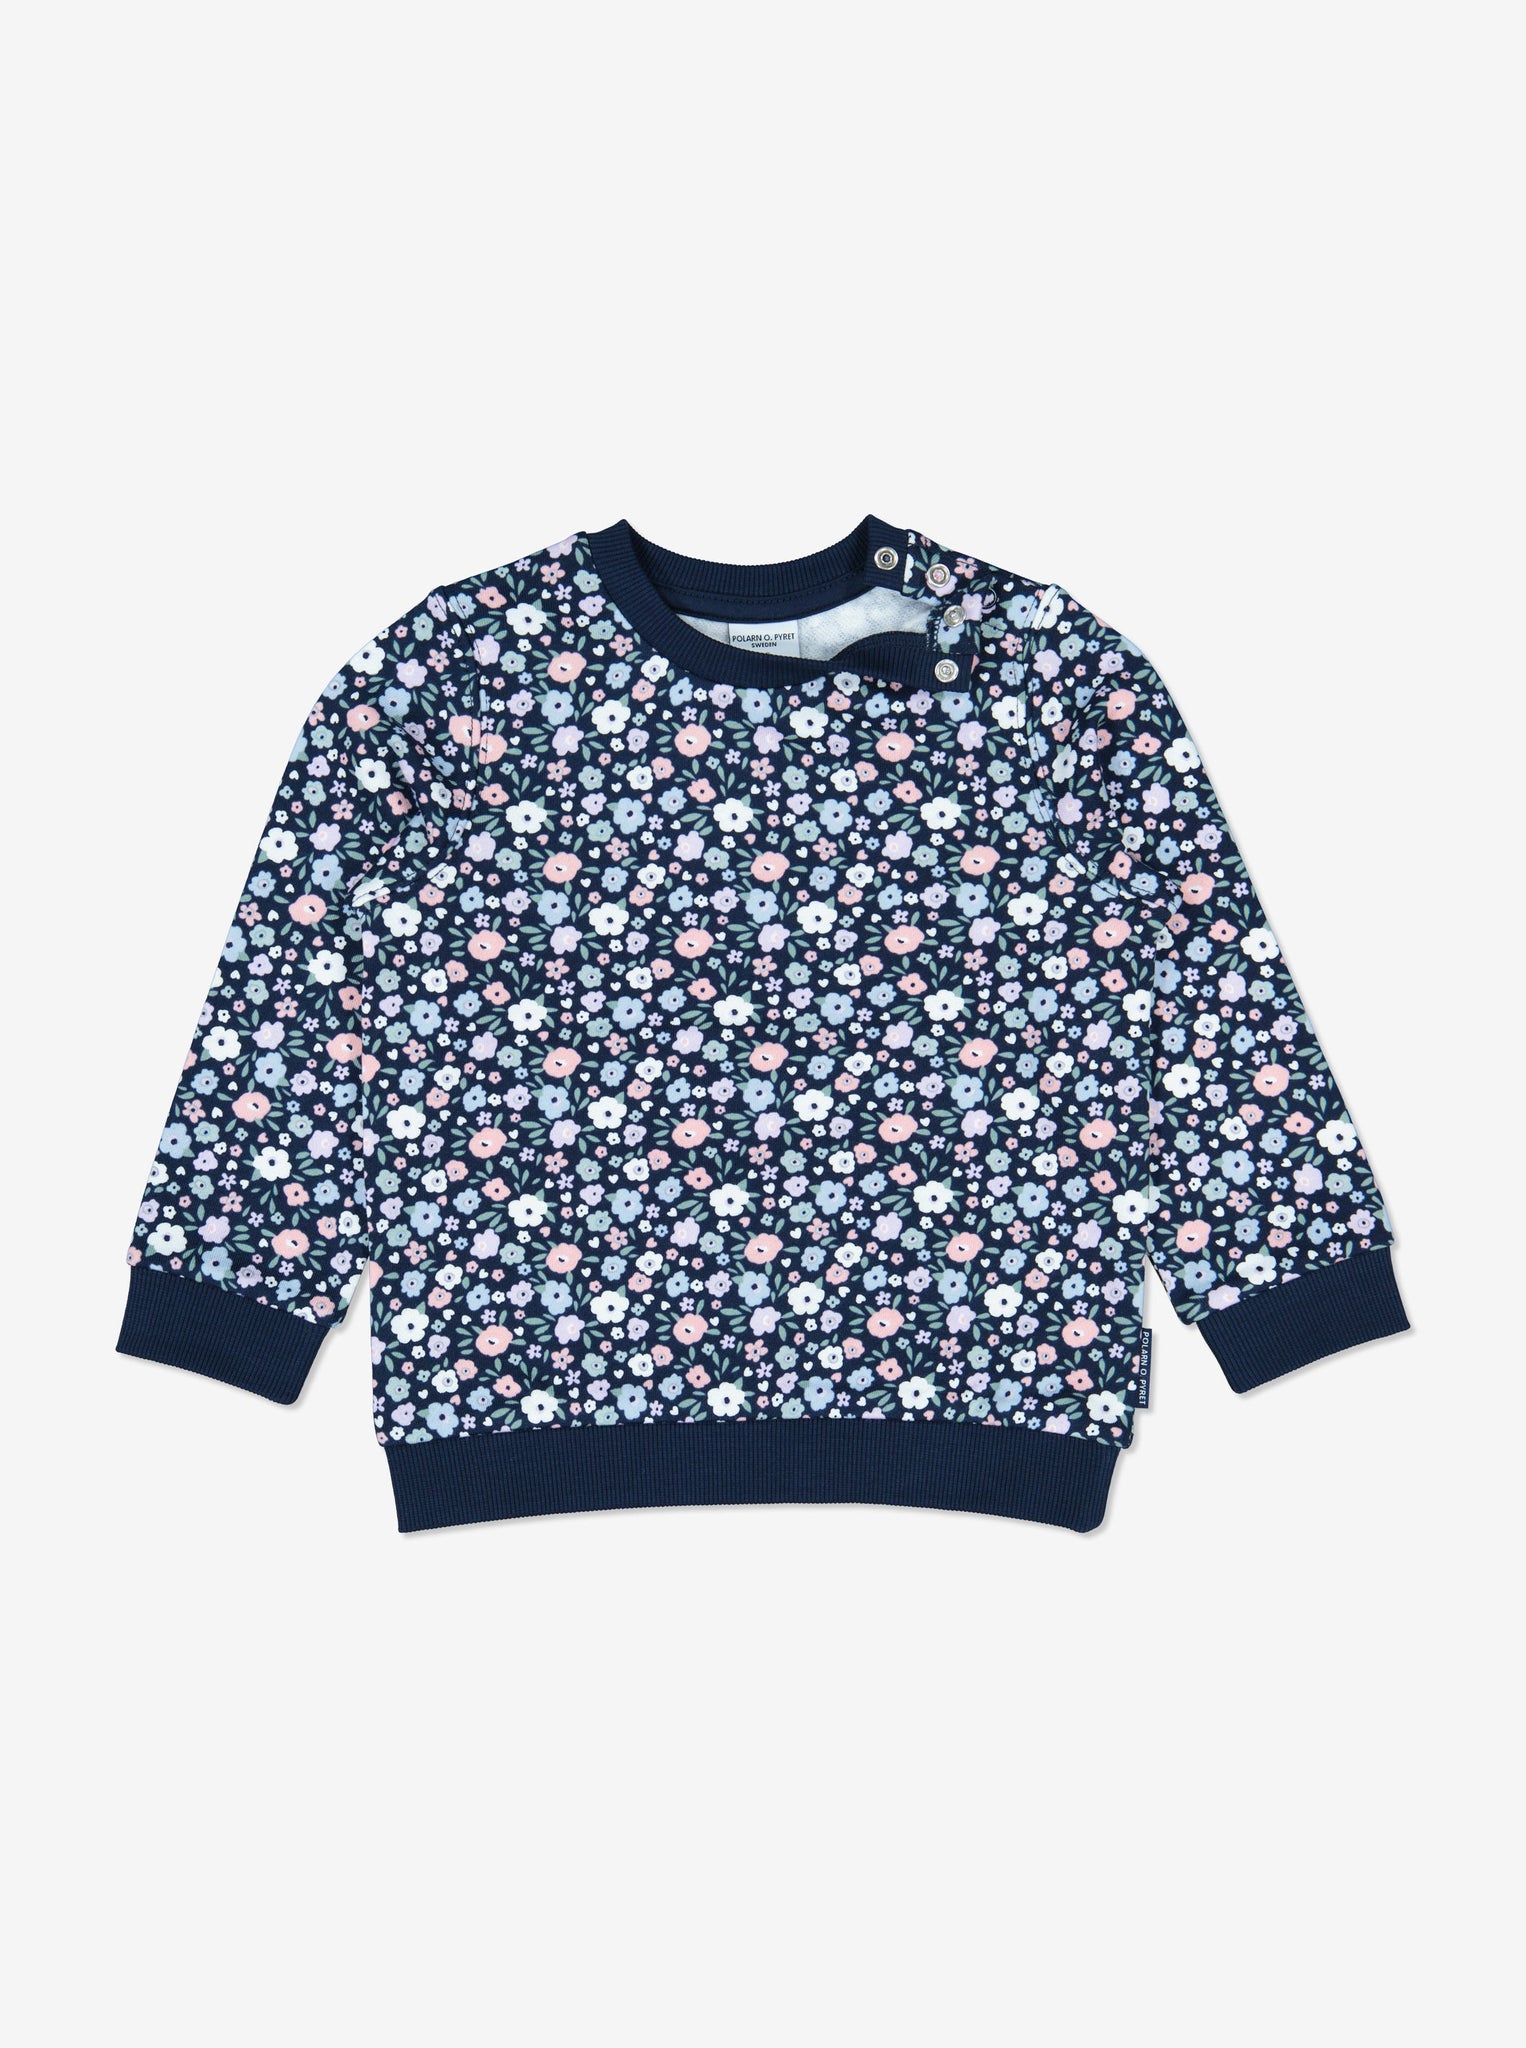  Floral Print Kids Sweatshirt from Polarn O. Pyret Kidswear. Made using sustainable materials.